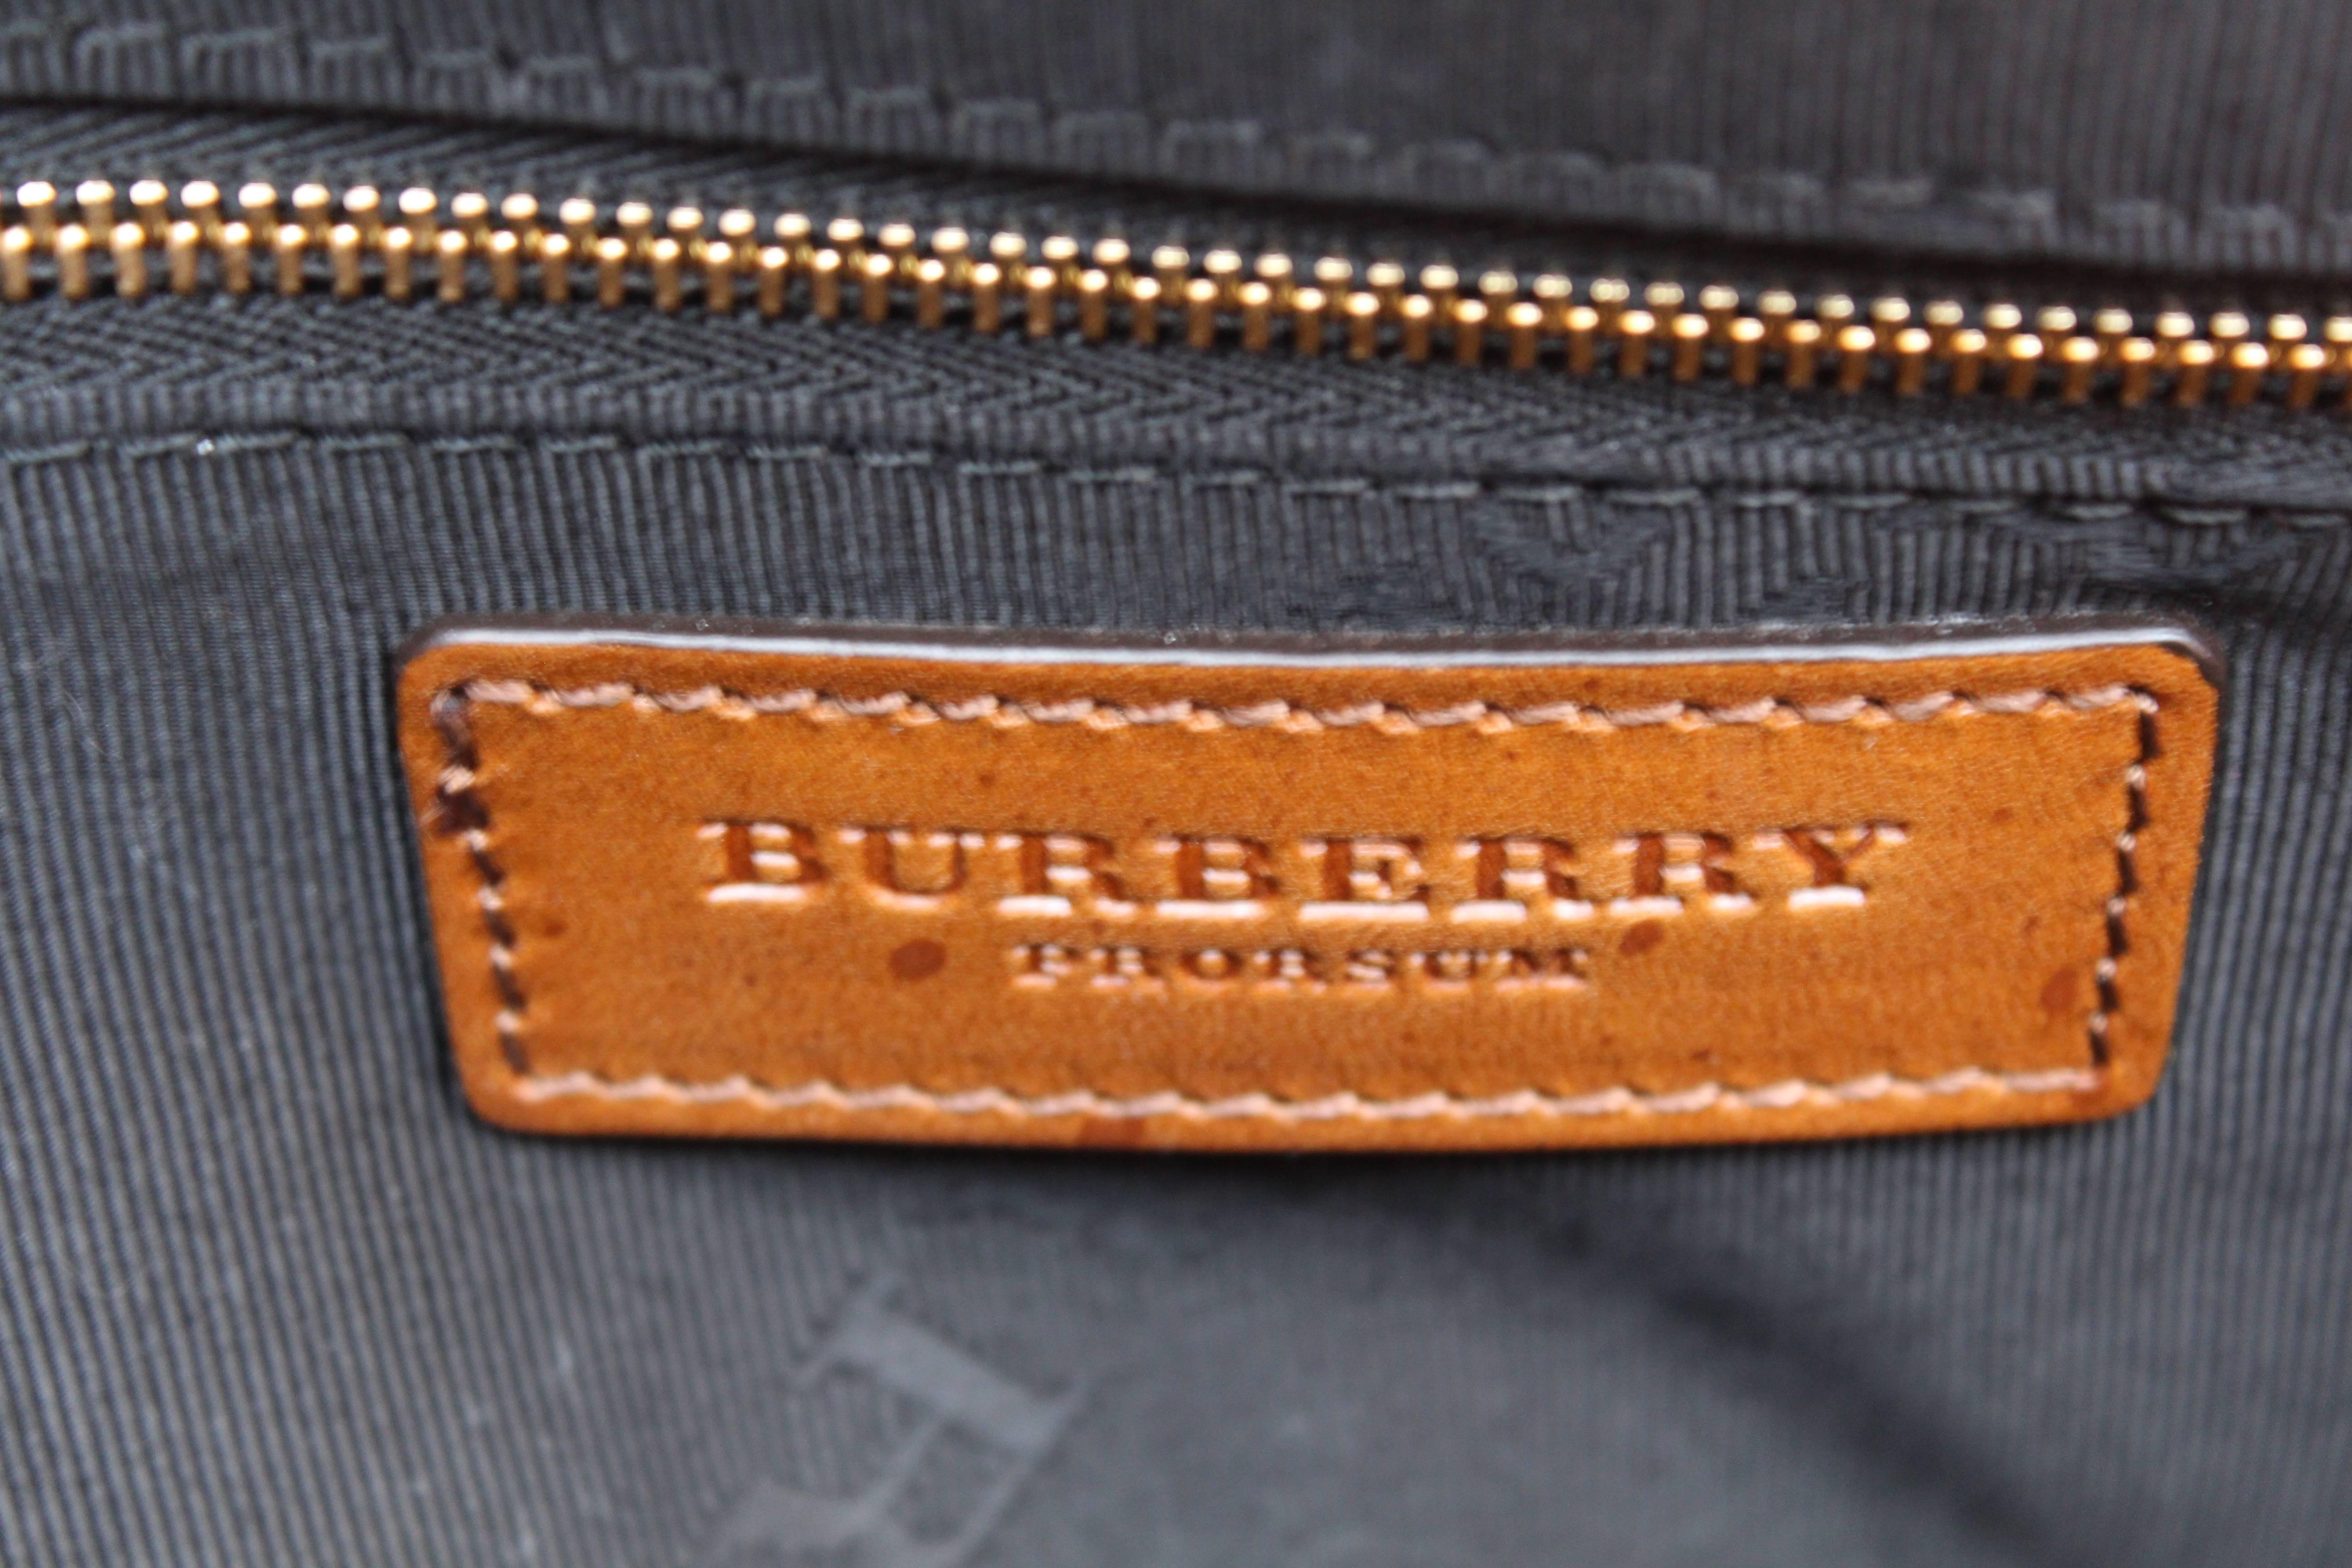 Fall 2014 Burberry Prorsum Orchard Tapestry Leather Bag 2